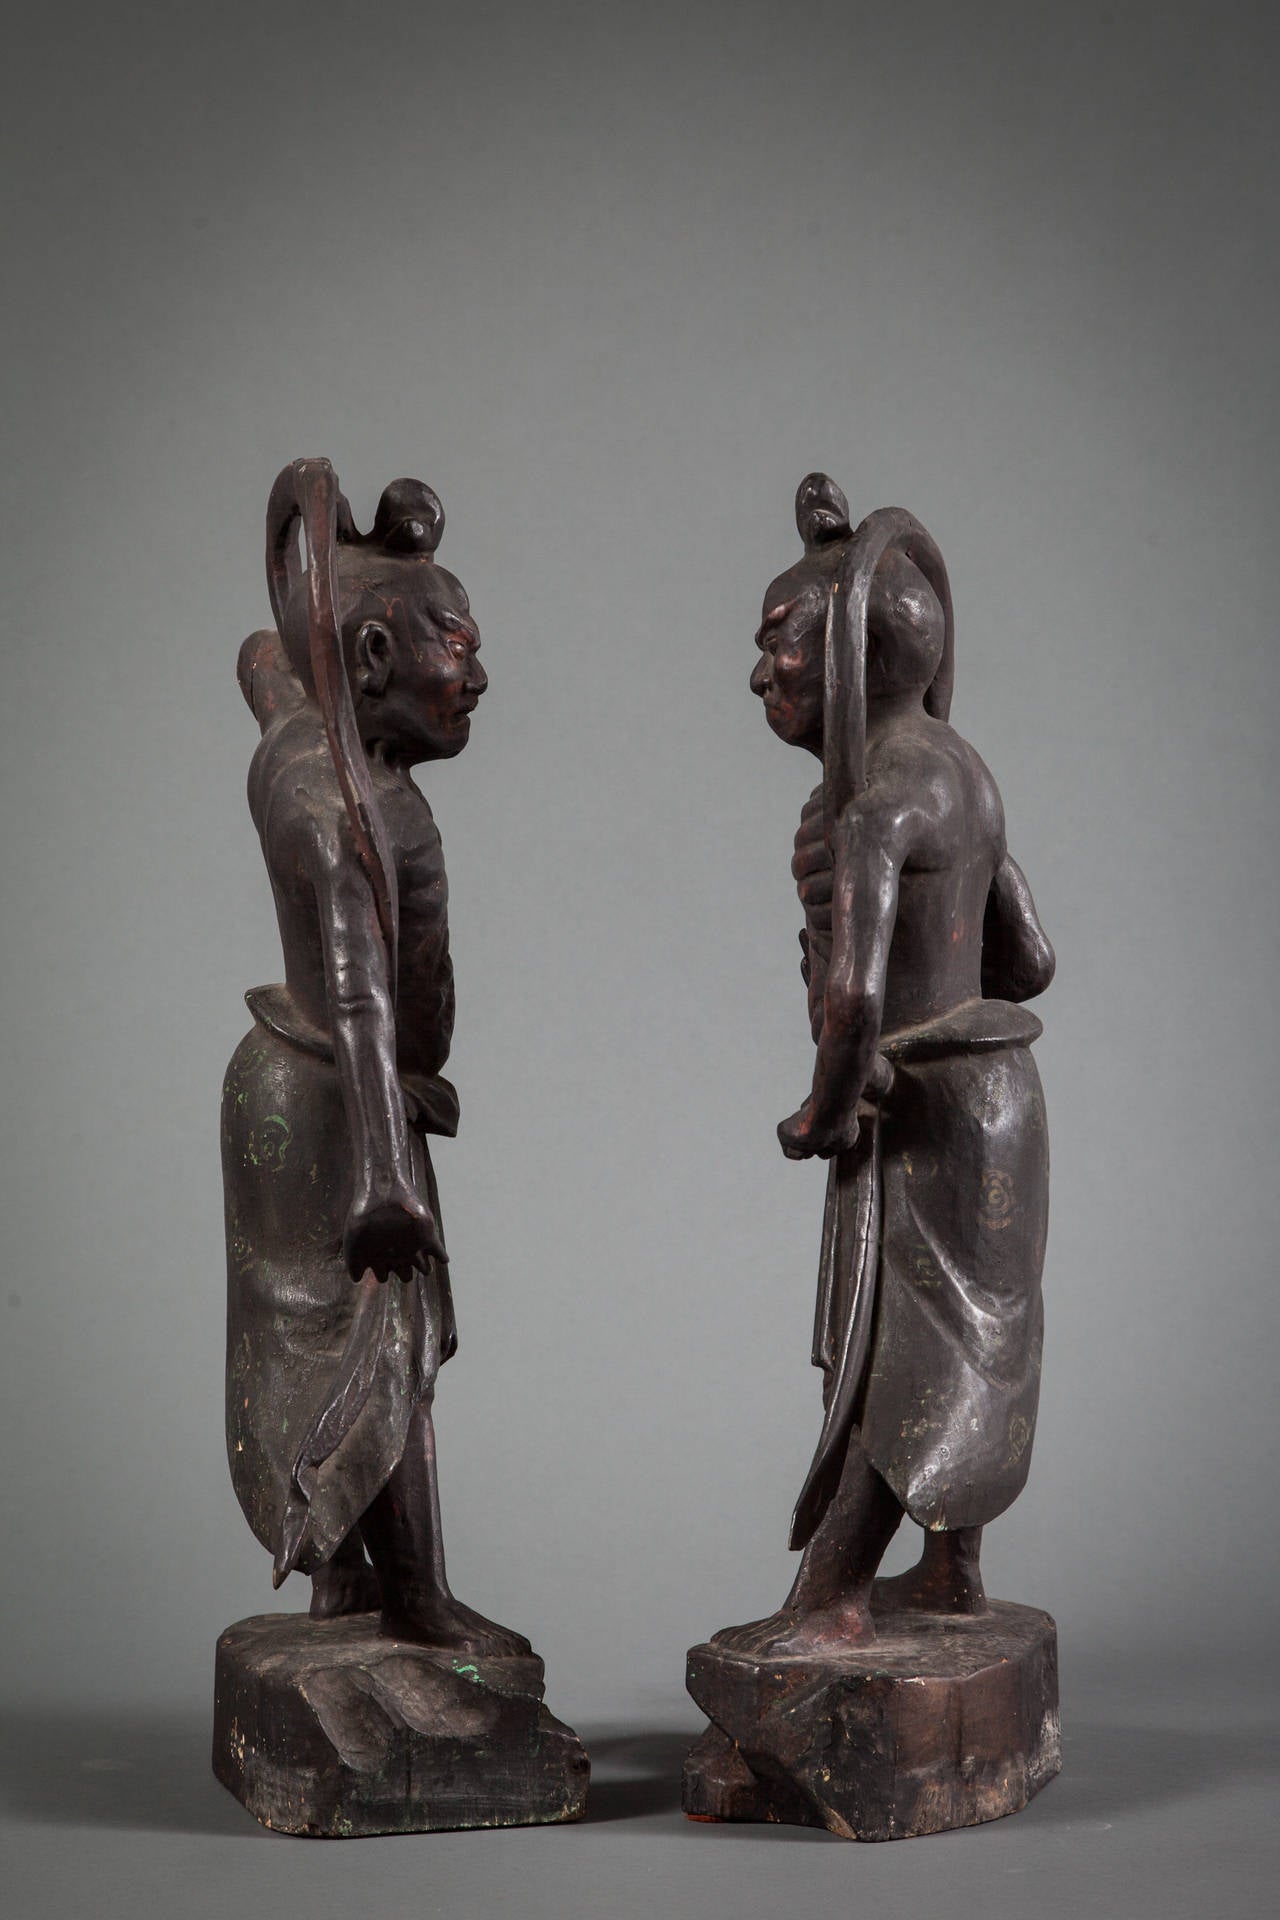 Pair of Japanese Buddhist guardian figures. Wood with mineral pigments on gesso.